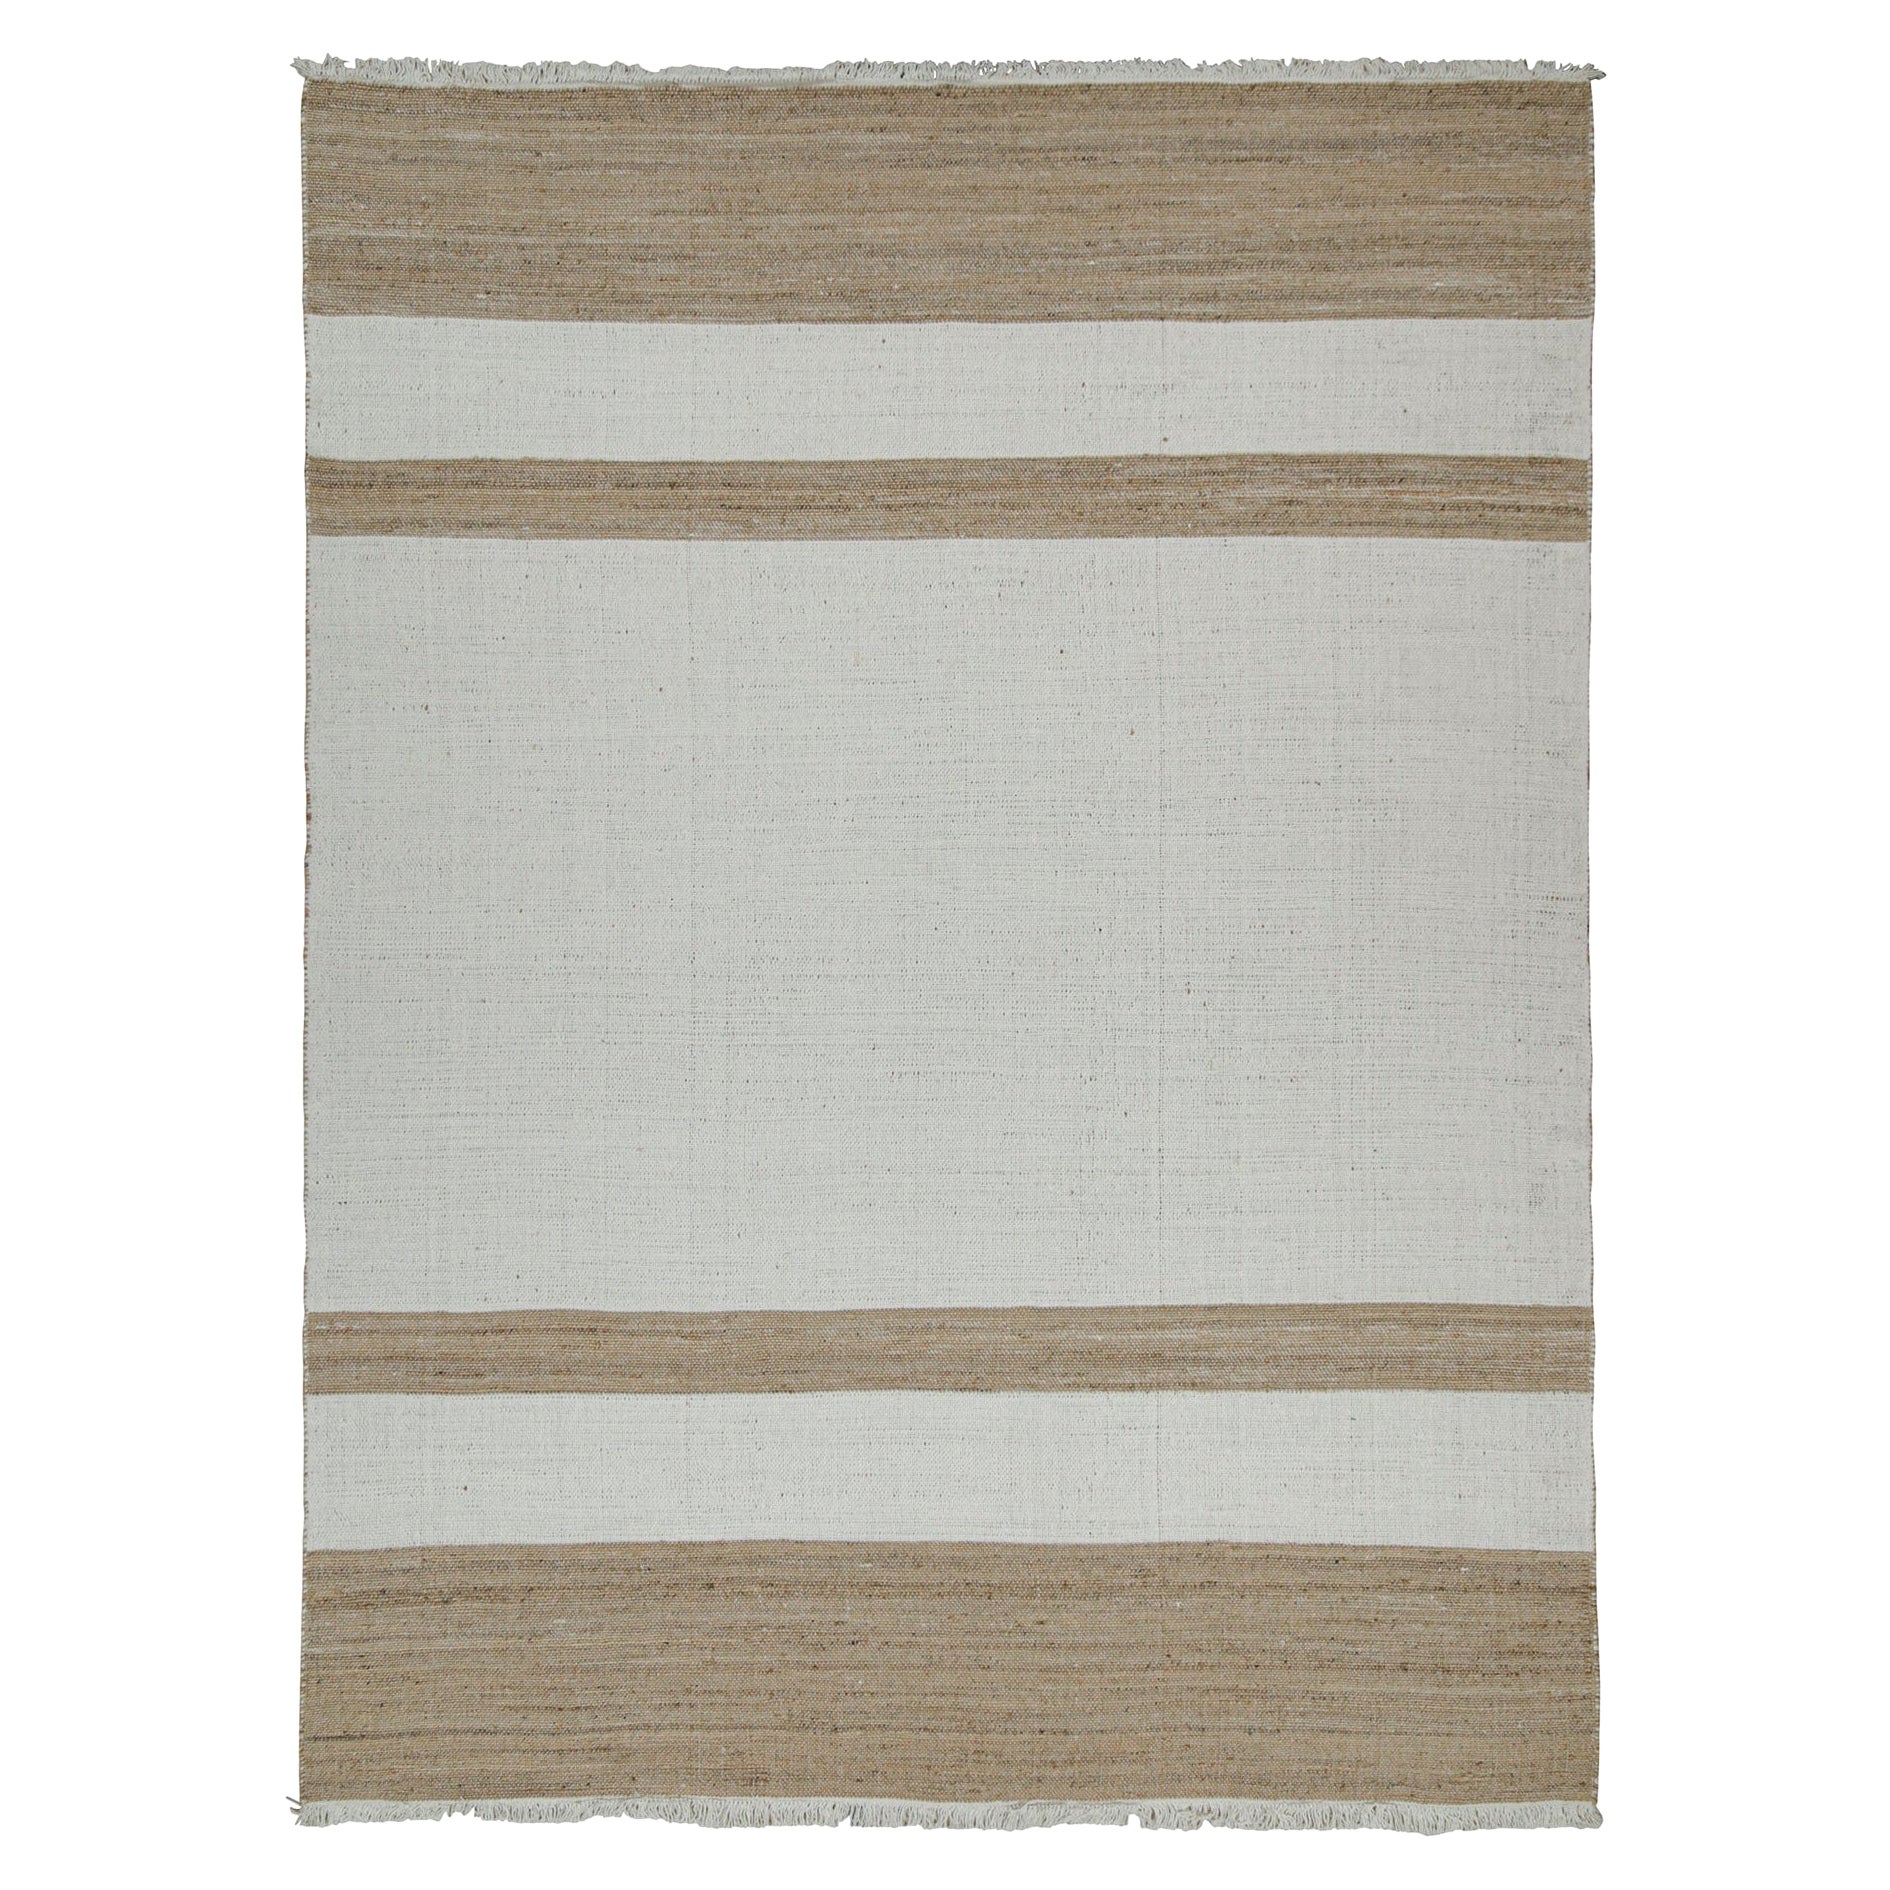 Rug & Kilim’s Contemporary Jute Flat Weave in White and Beige-Brown Stripes For Sale